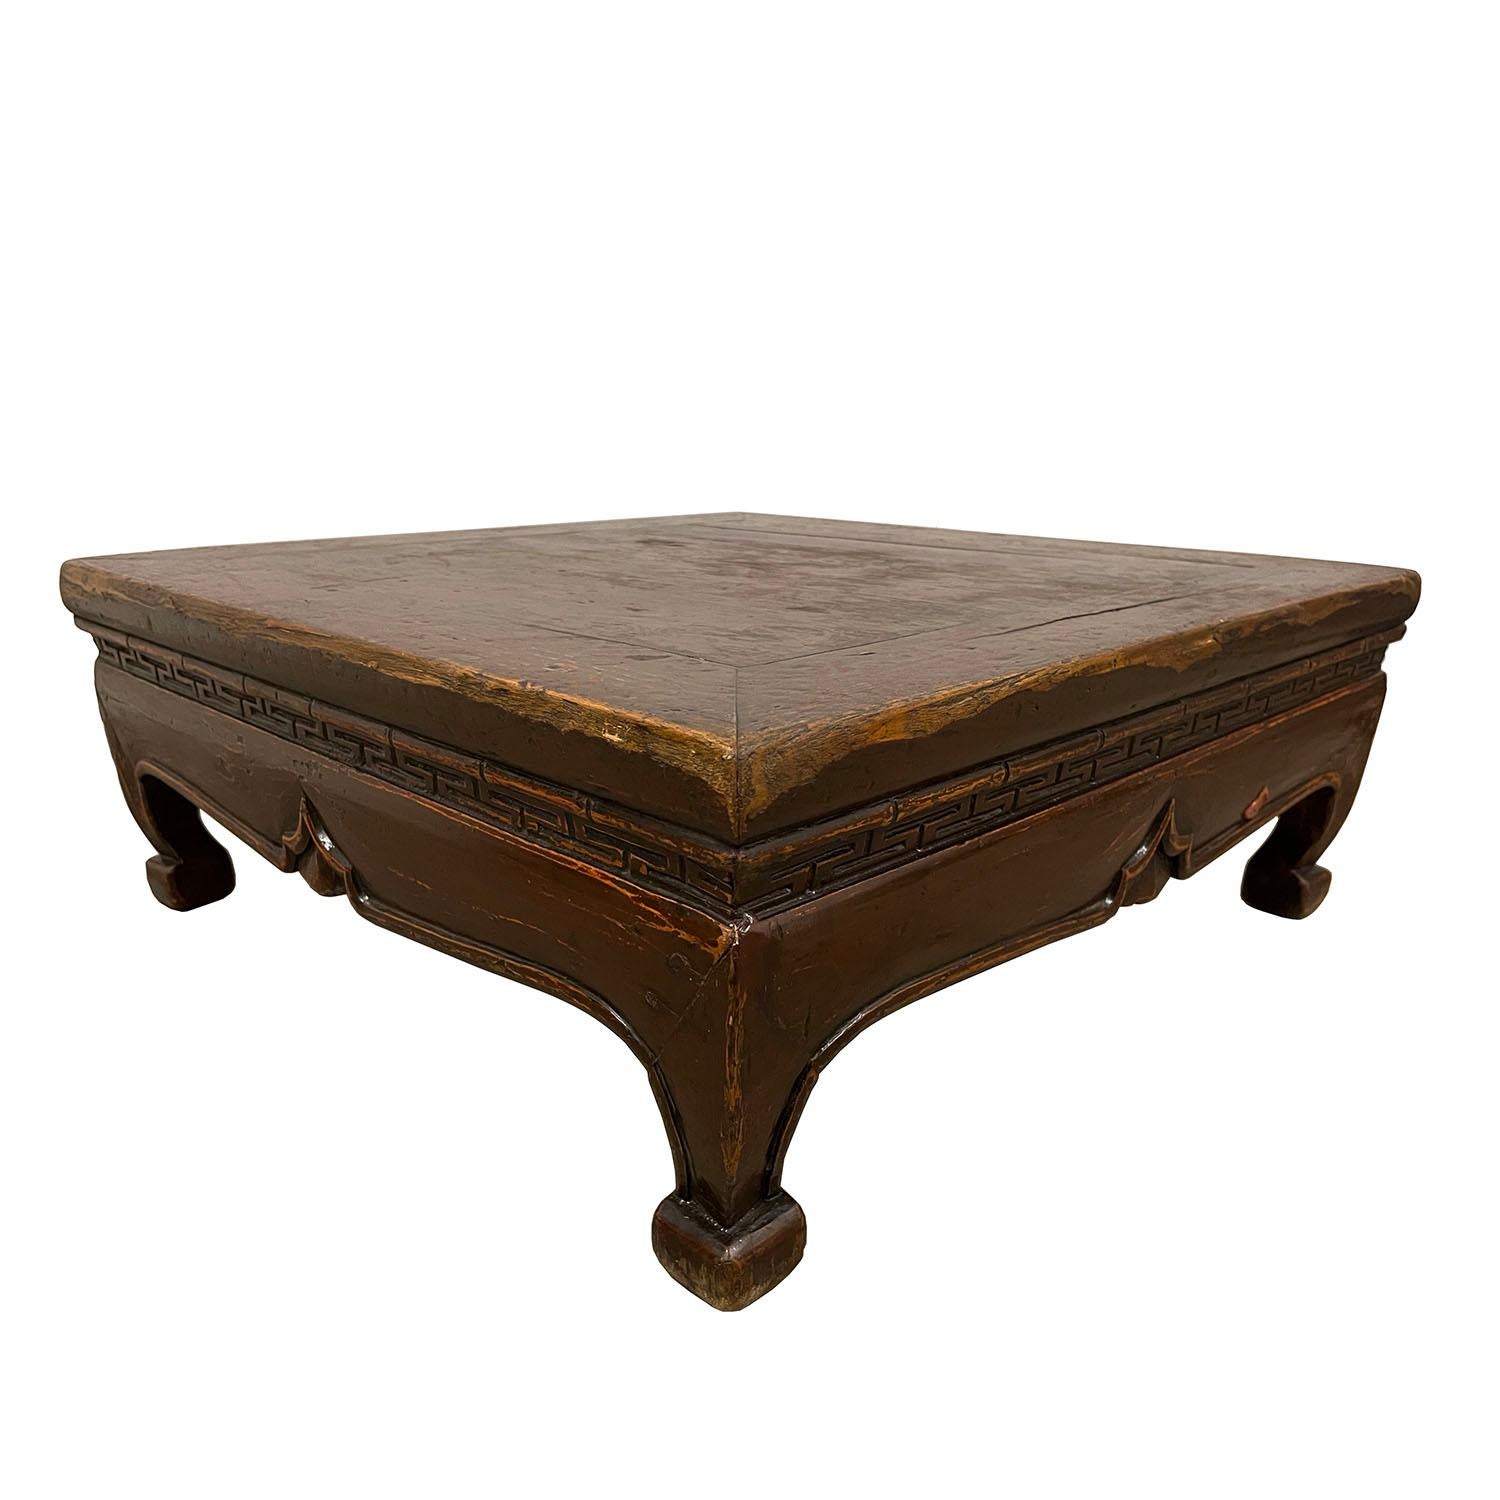 This antique Chinese carved low coffee table is made of solid Elm wood with brown lacquer finished. It has narrow carved waist with traditional Chinese folks arts design. Very smooth to touch and full of patina. From the pictures, you can see some